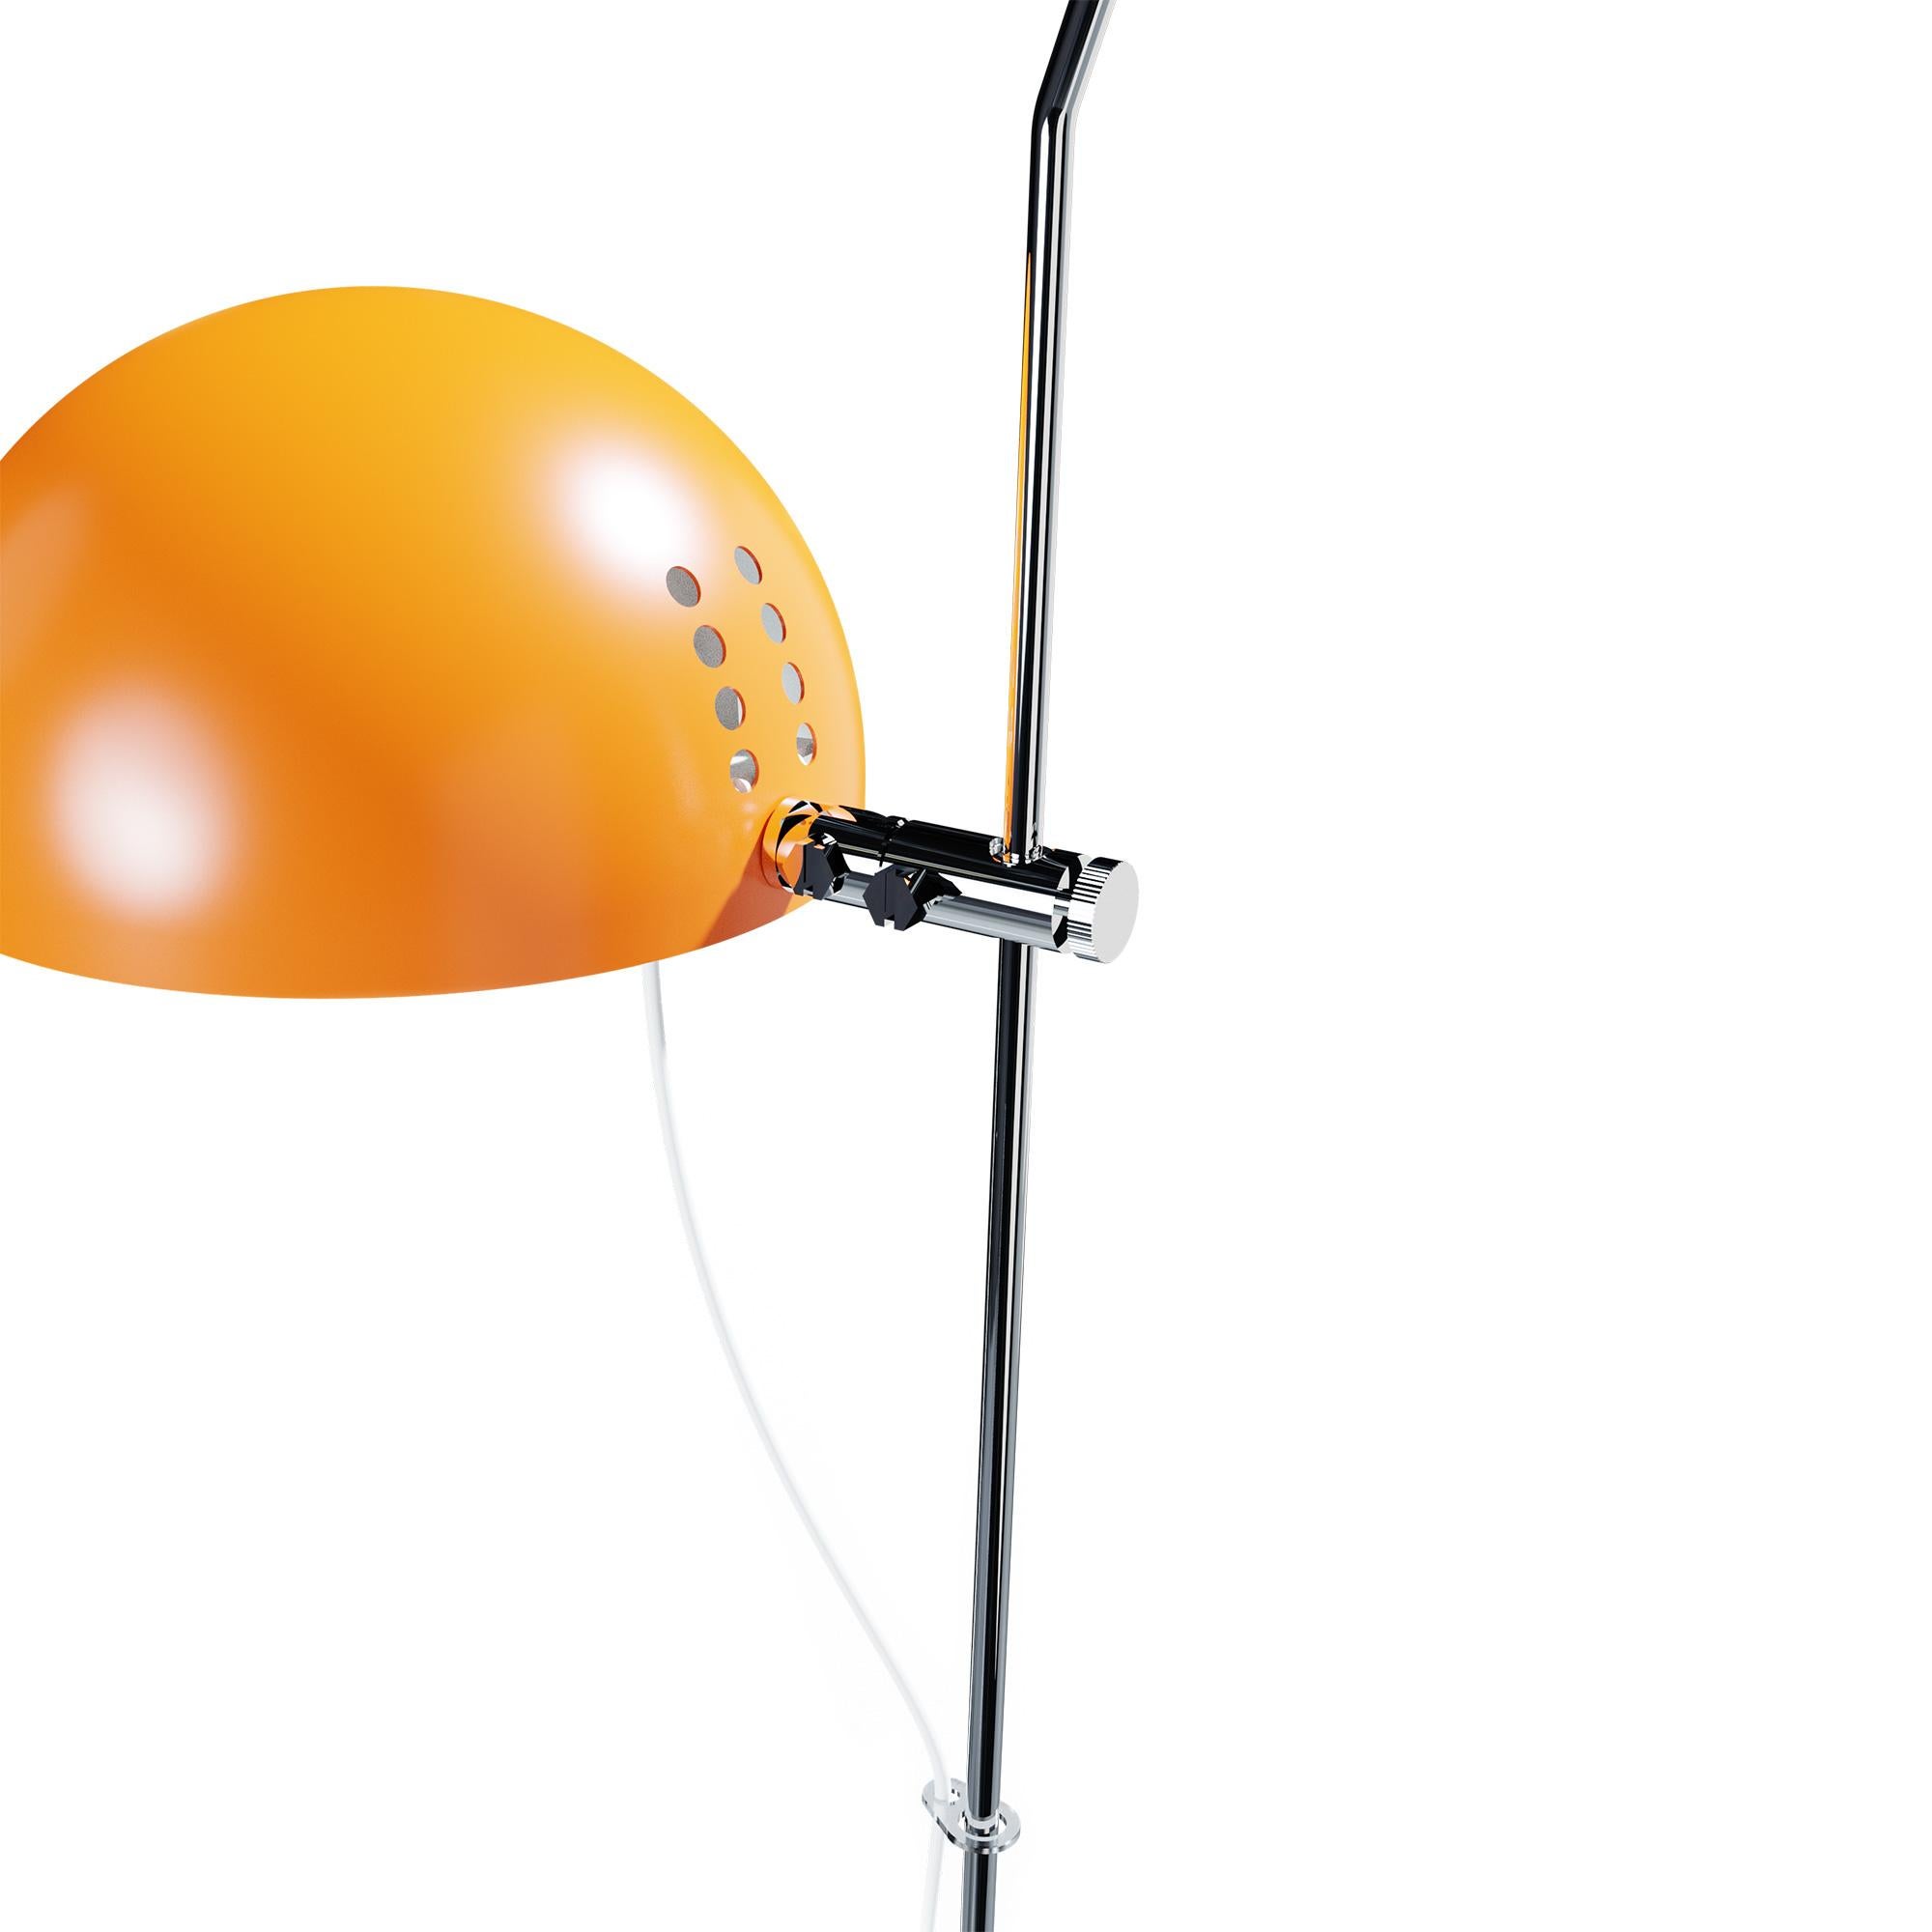 Alain Richard 'A21' desk lamp in orange for Disderot.

Executed in orange painted metal, this newly produced numbered edition with included certificate of authenticity is made in France by Disderot with many of the same small-scale manufacturing